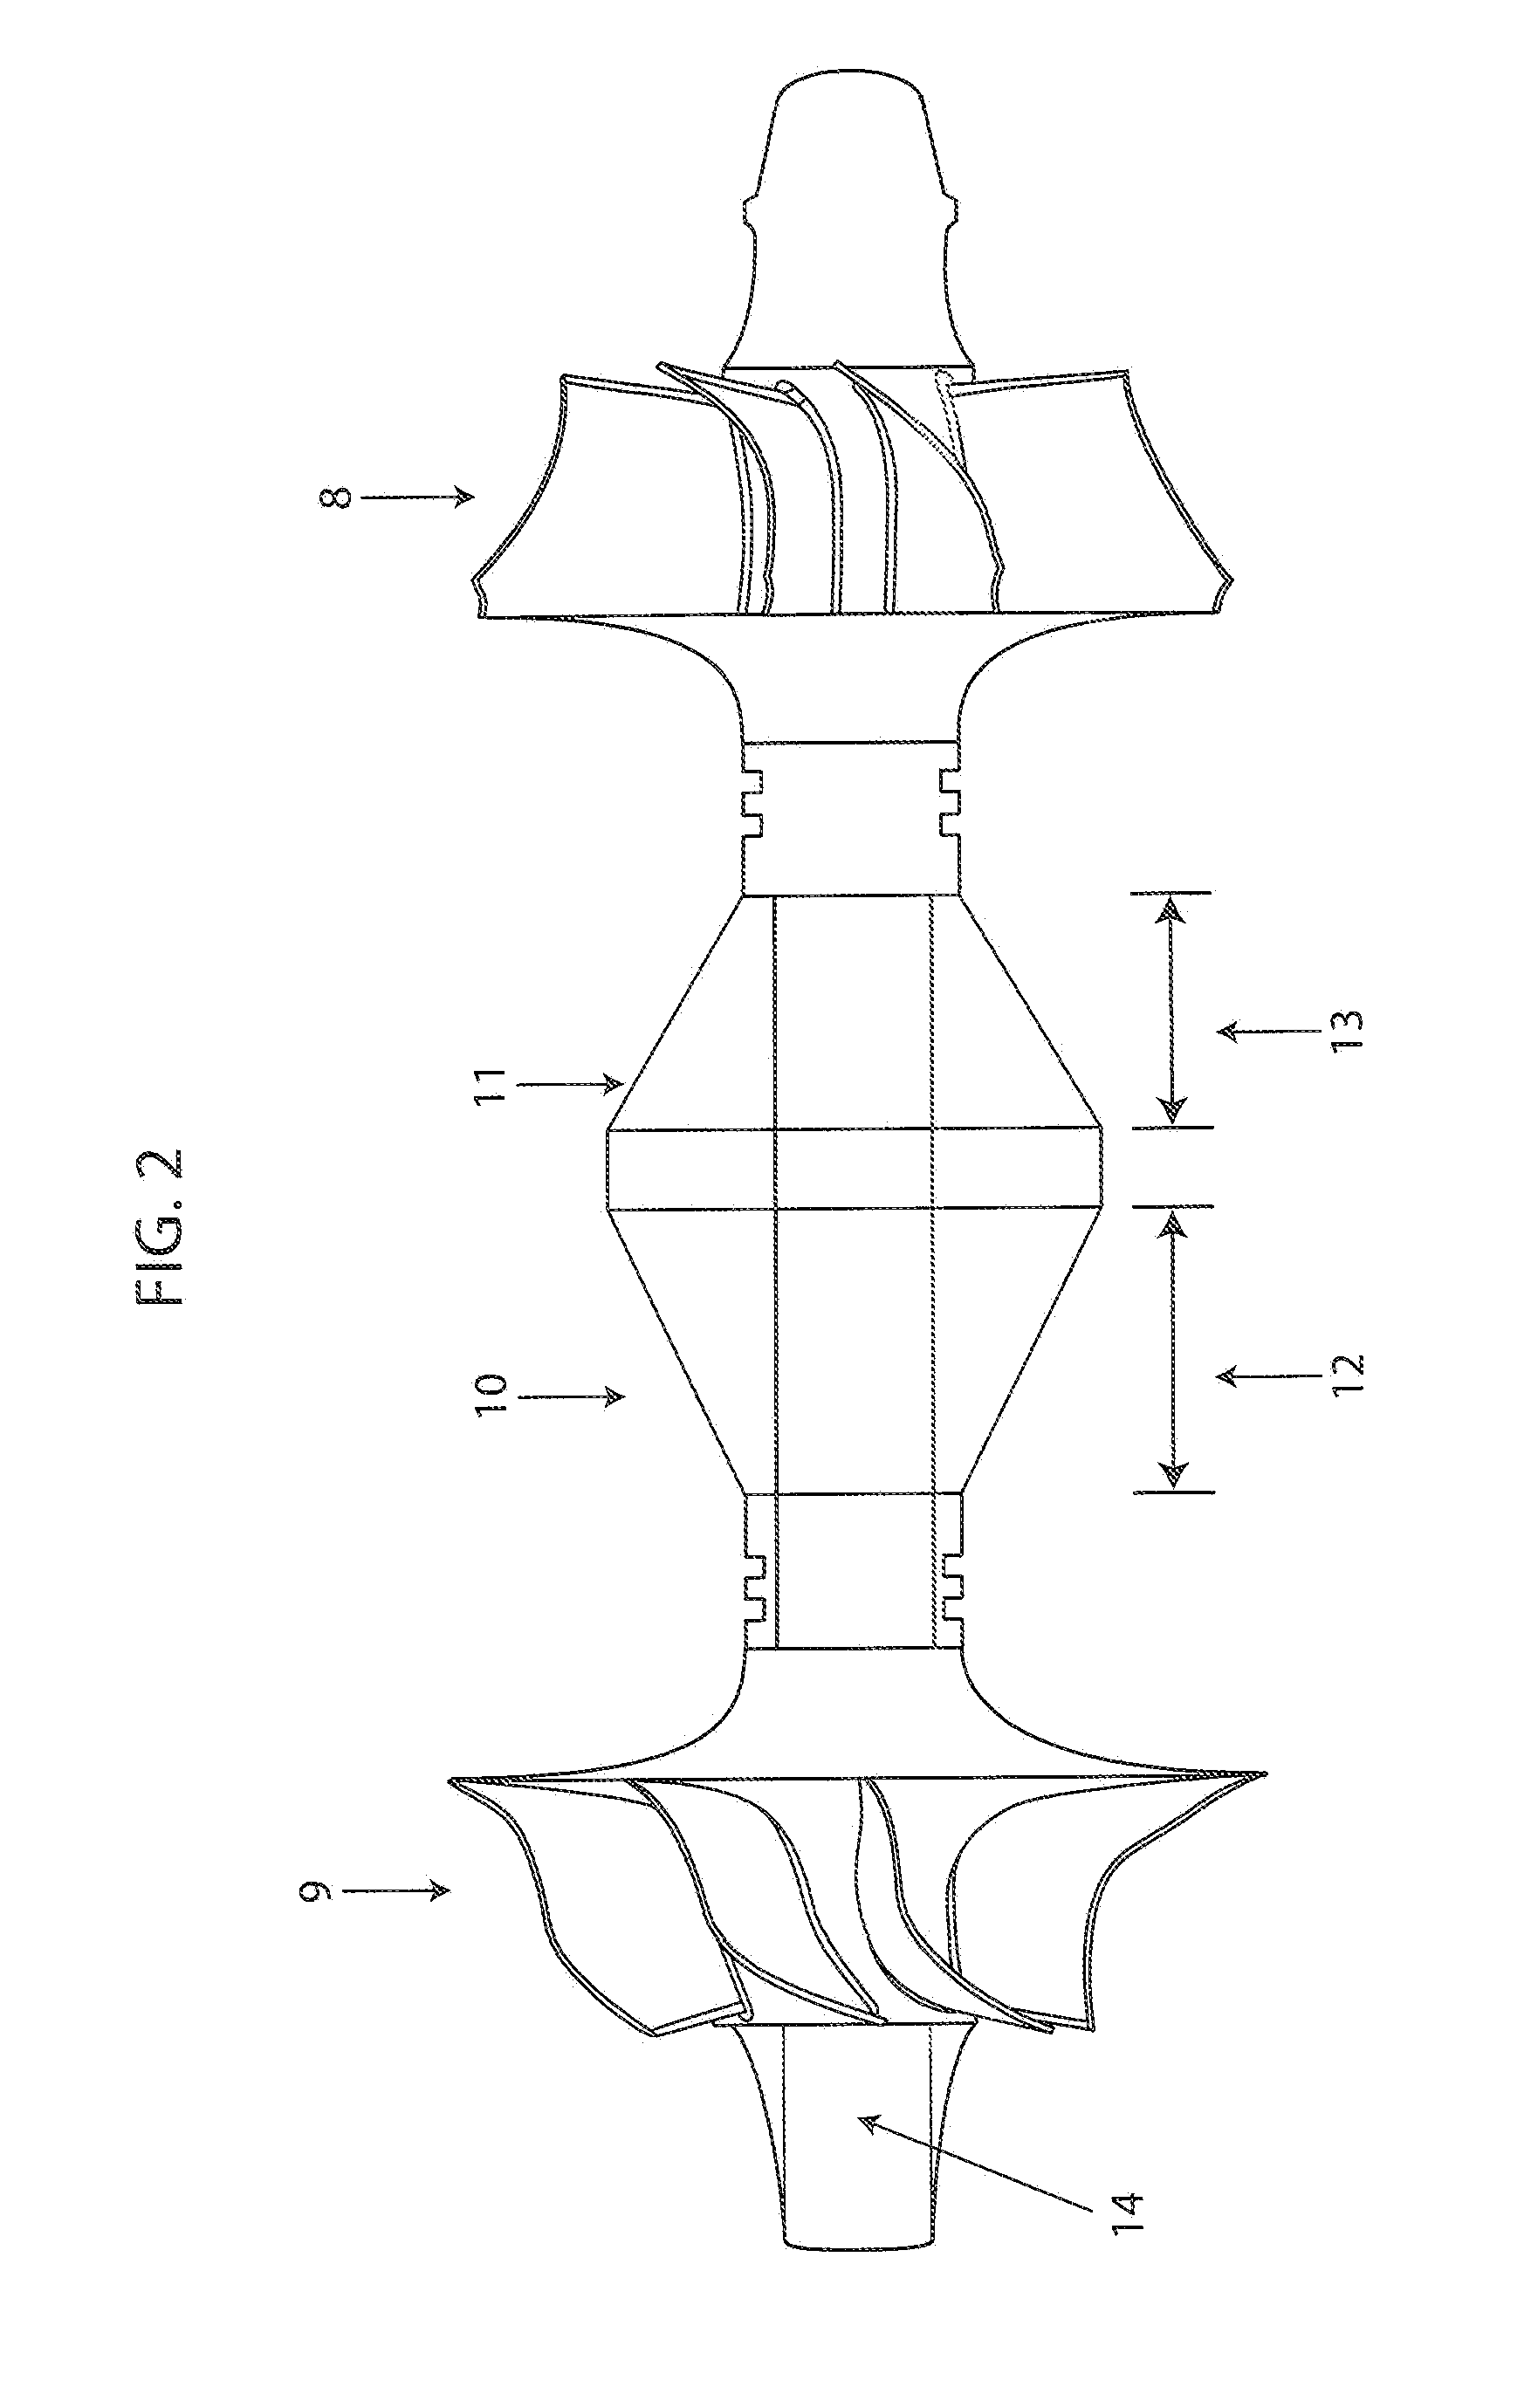 Oil-free turbocharger bearing assembly having conical shaft supported on compliant gas bearings